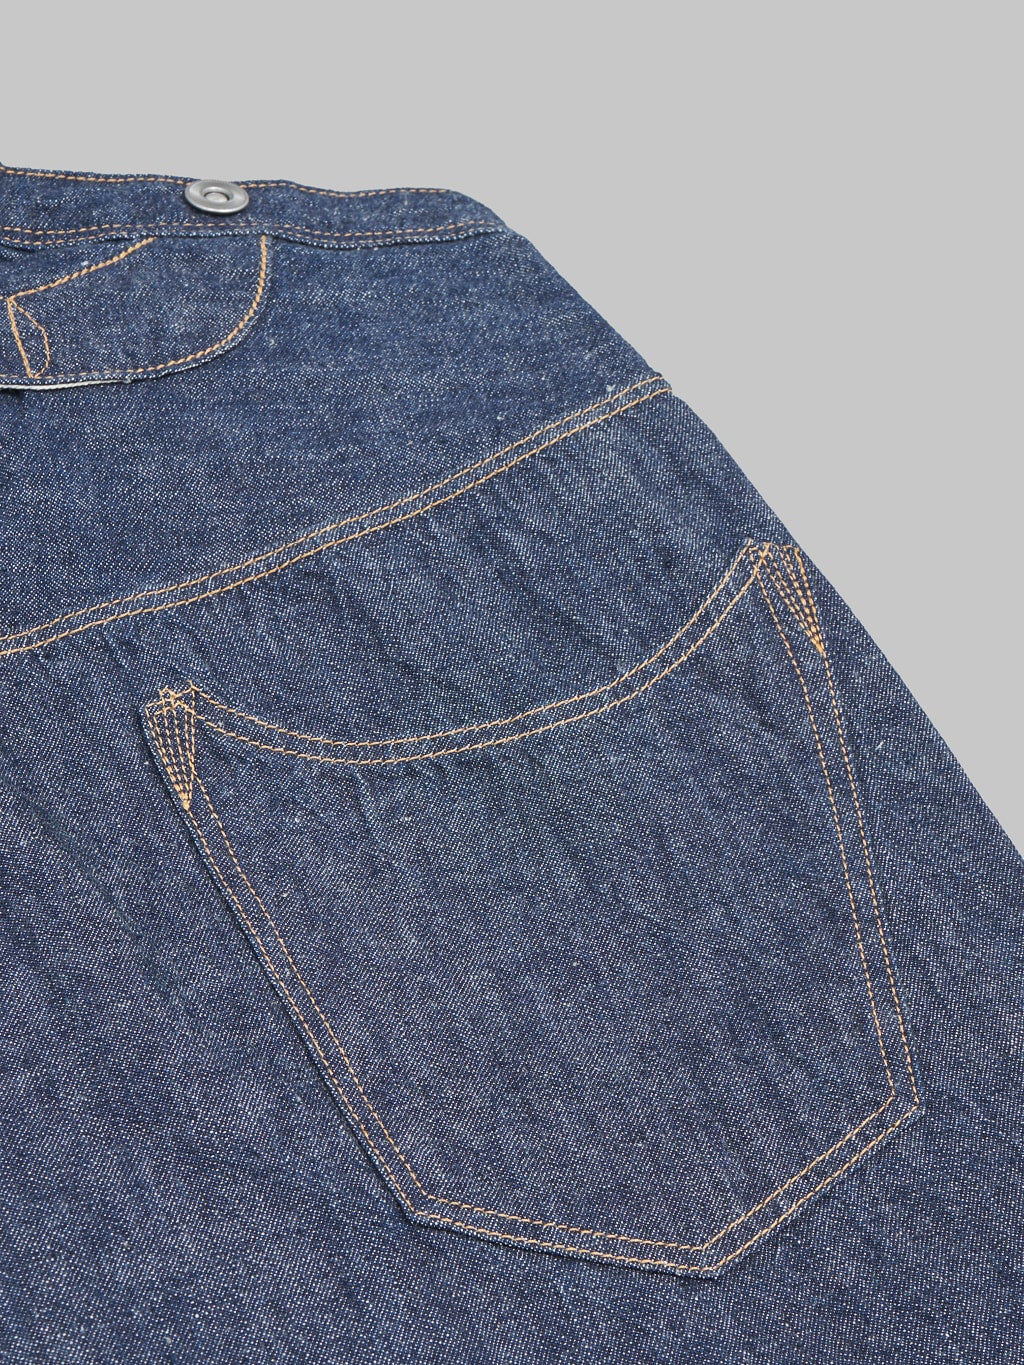 TCB Good Luck Wide Straight Jeans pocket closeup